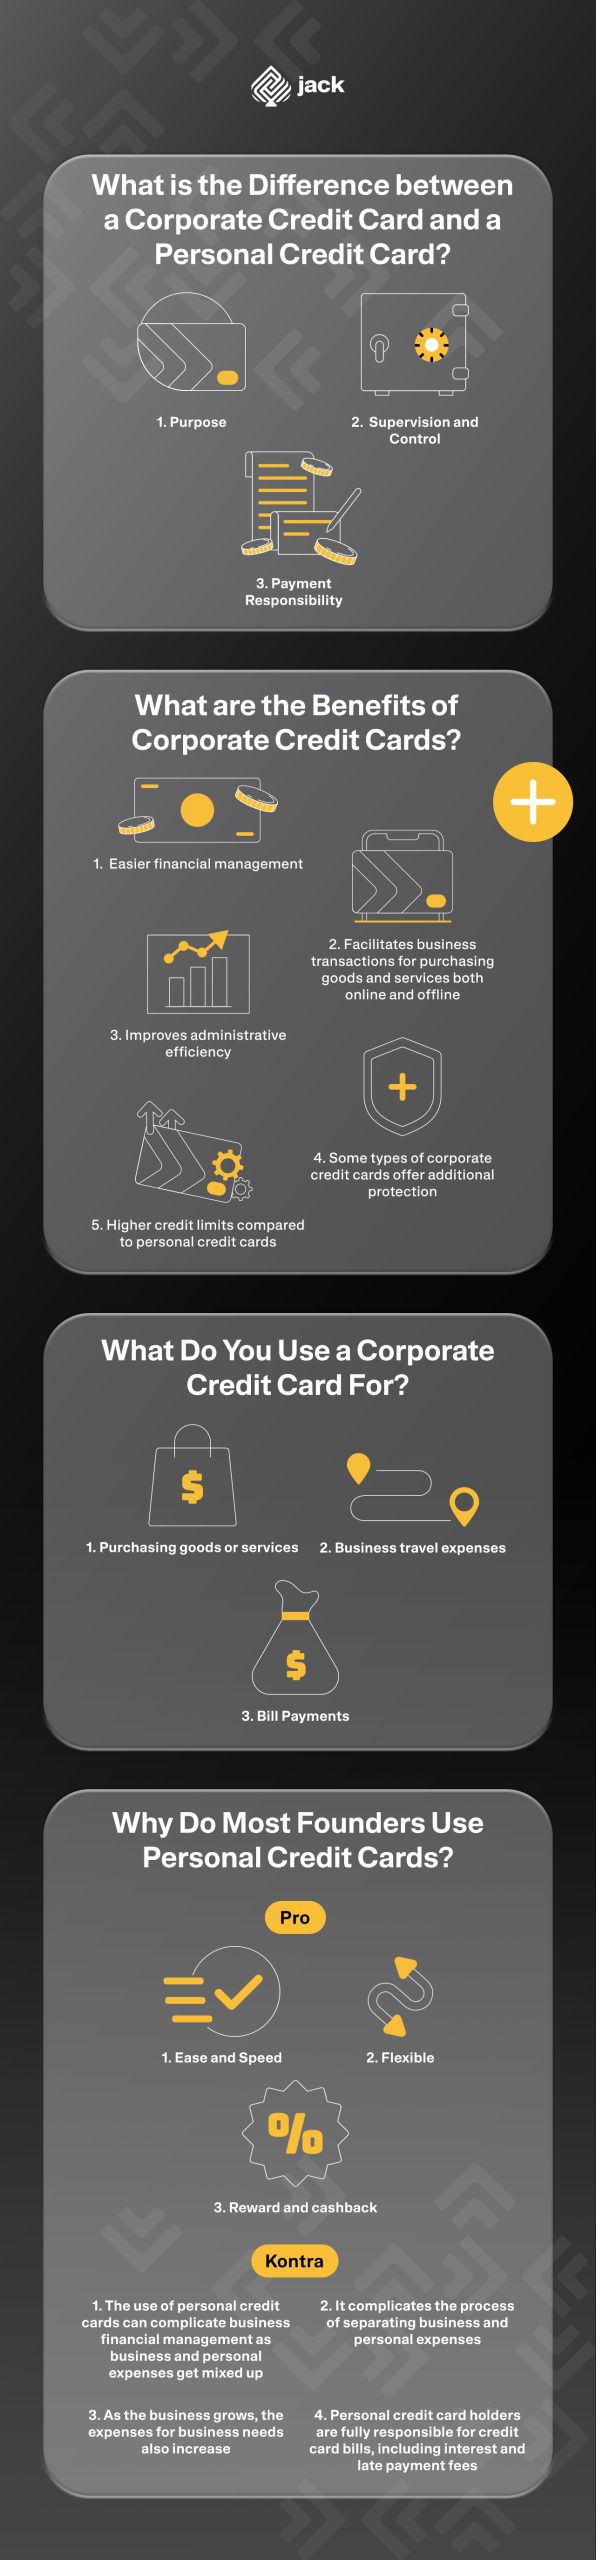 Corporate Credit Card Definition, Types, Benefits, and How Cards Work for Startups